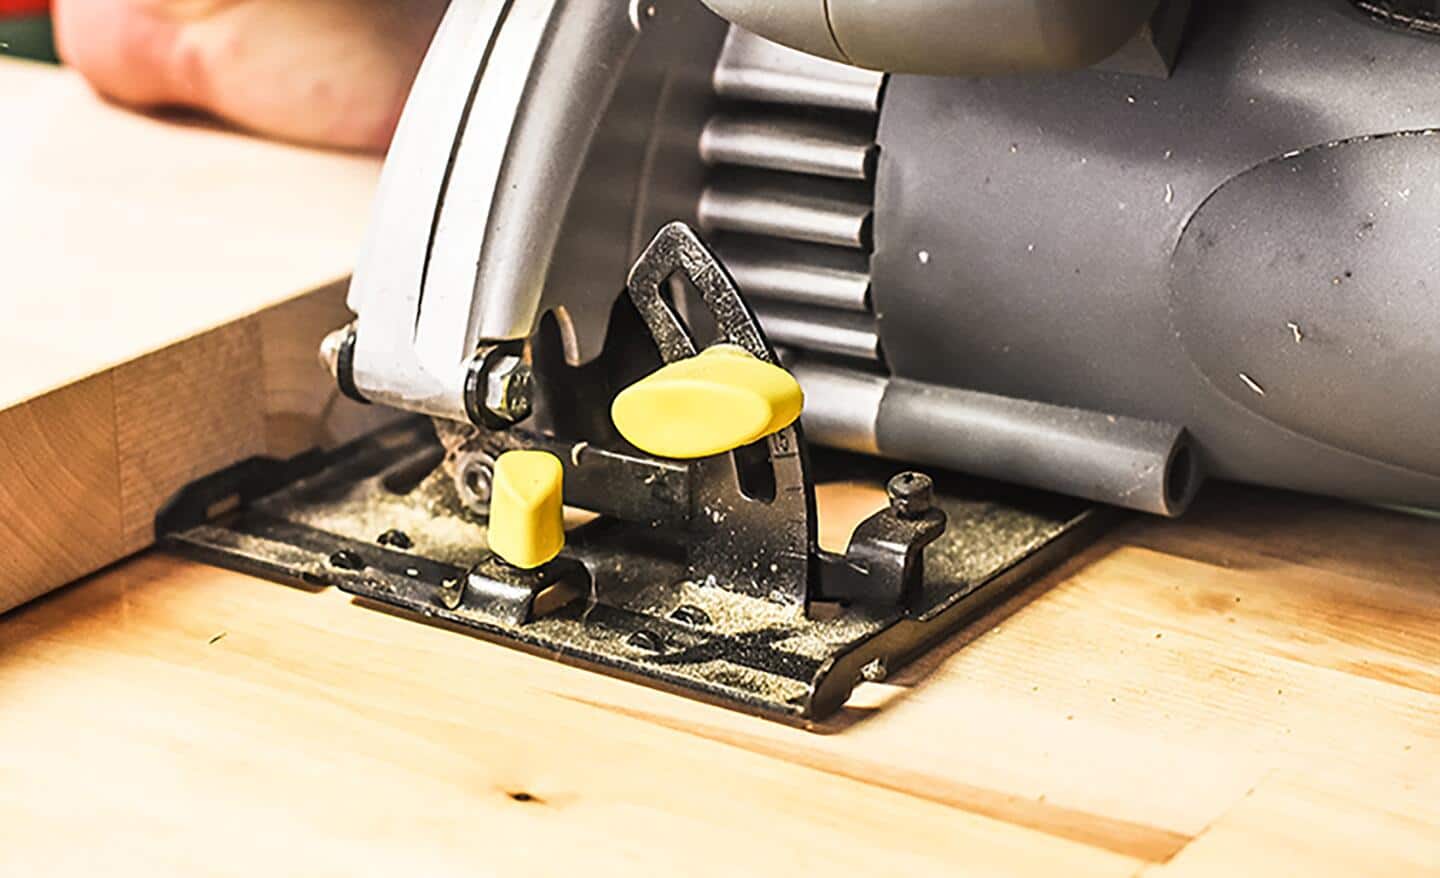 A person trims a section of butcher block with a saw.